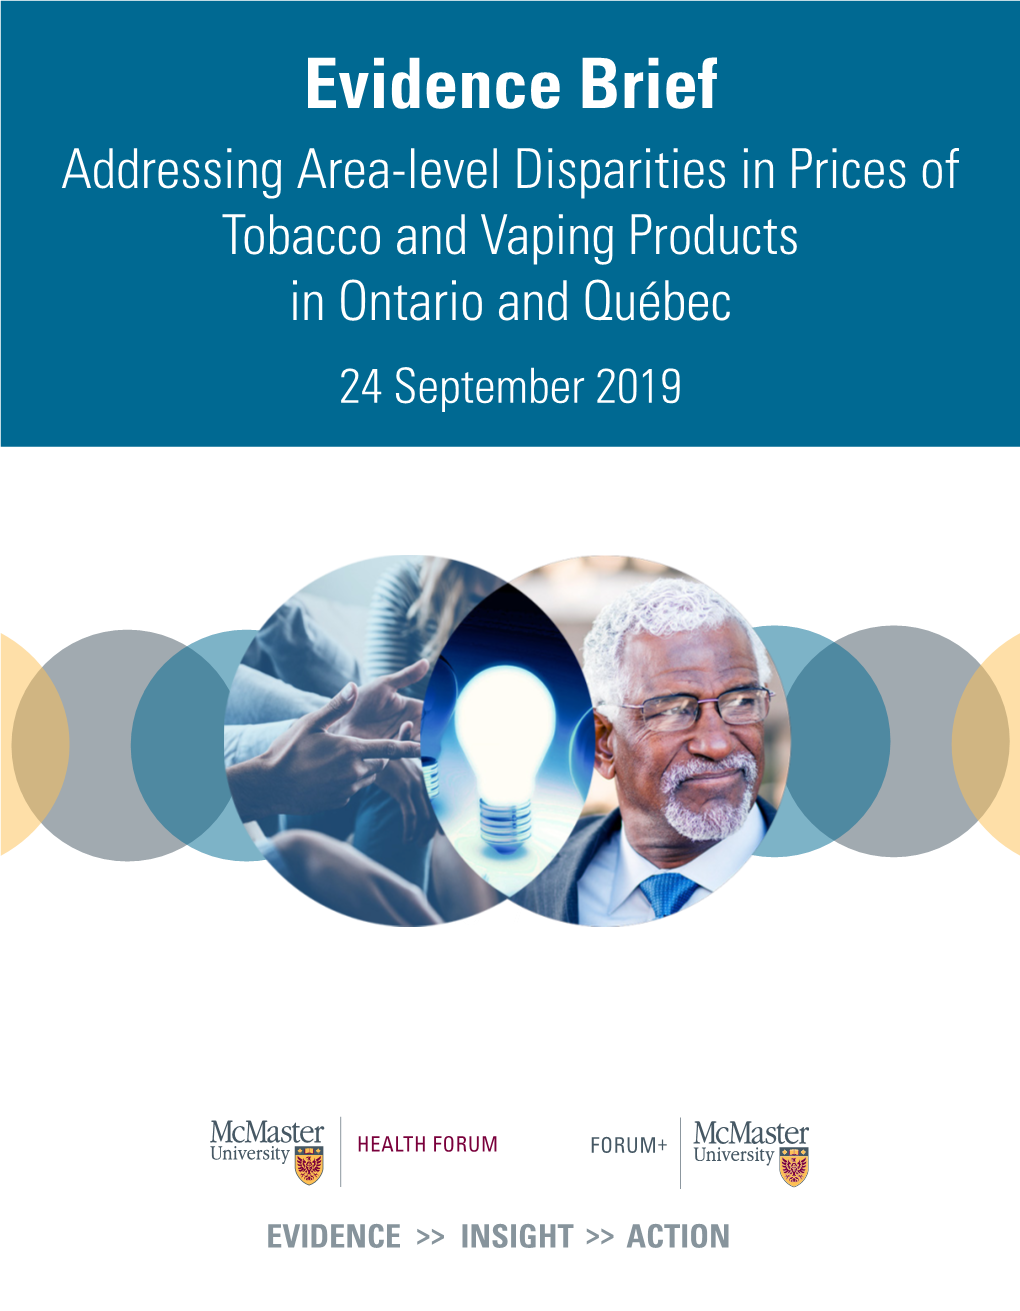 Addressing Area-Level Disparities in Prices of Tobacco and Vaping Products in Ontario and Québec 24 September 2019